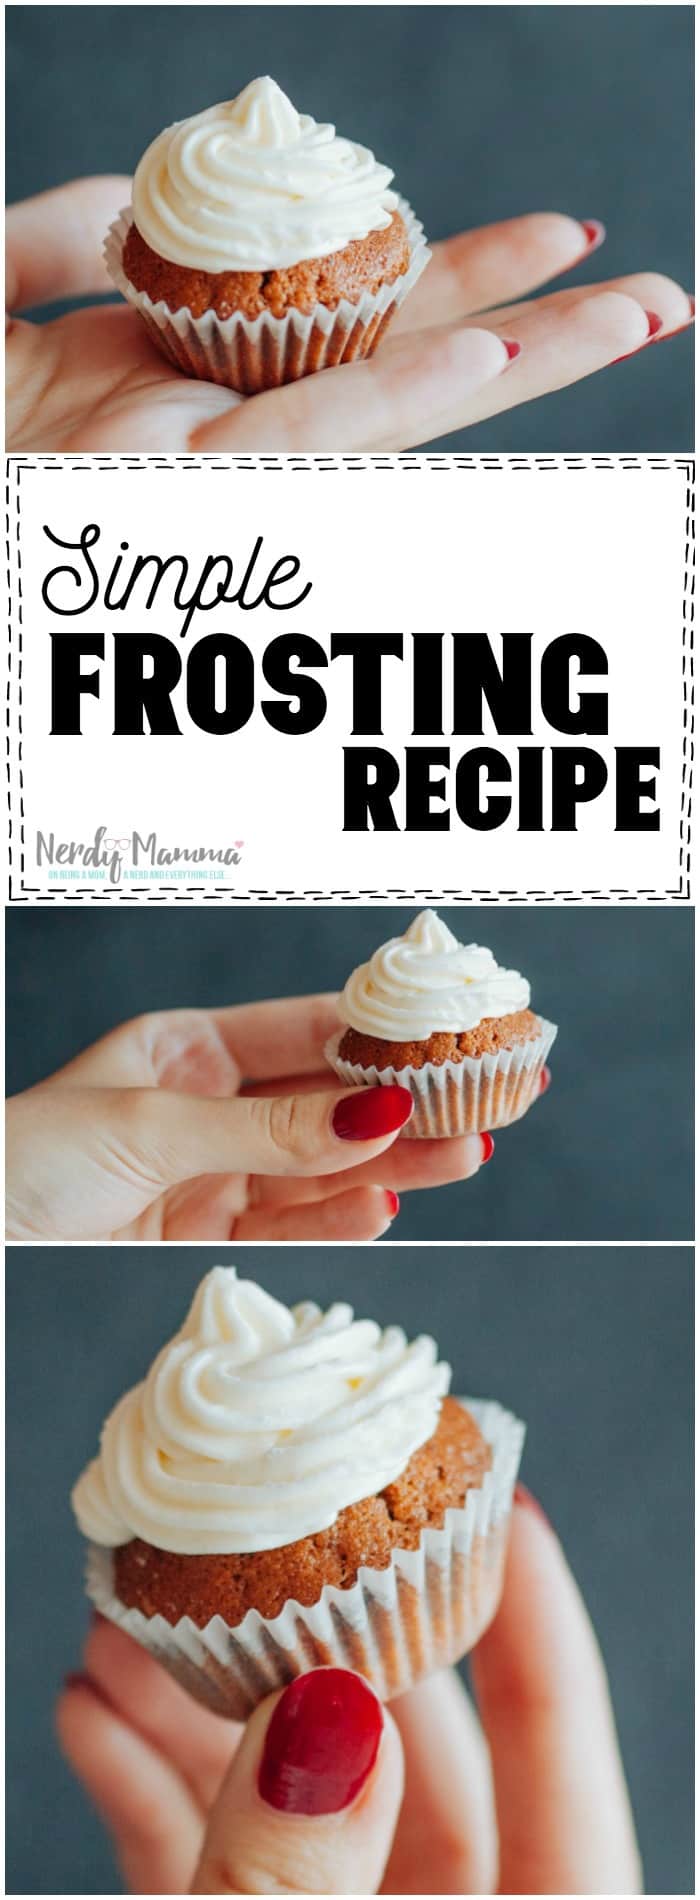 Man, I love how simple this frosting recipe is! I can taste it now.